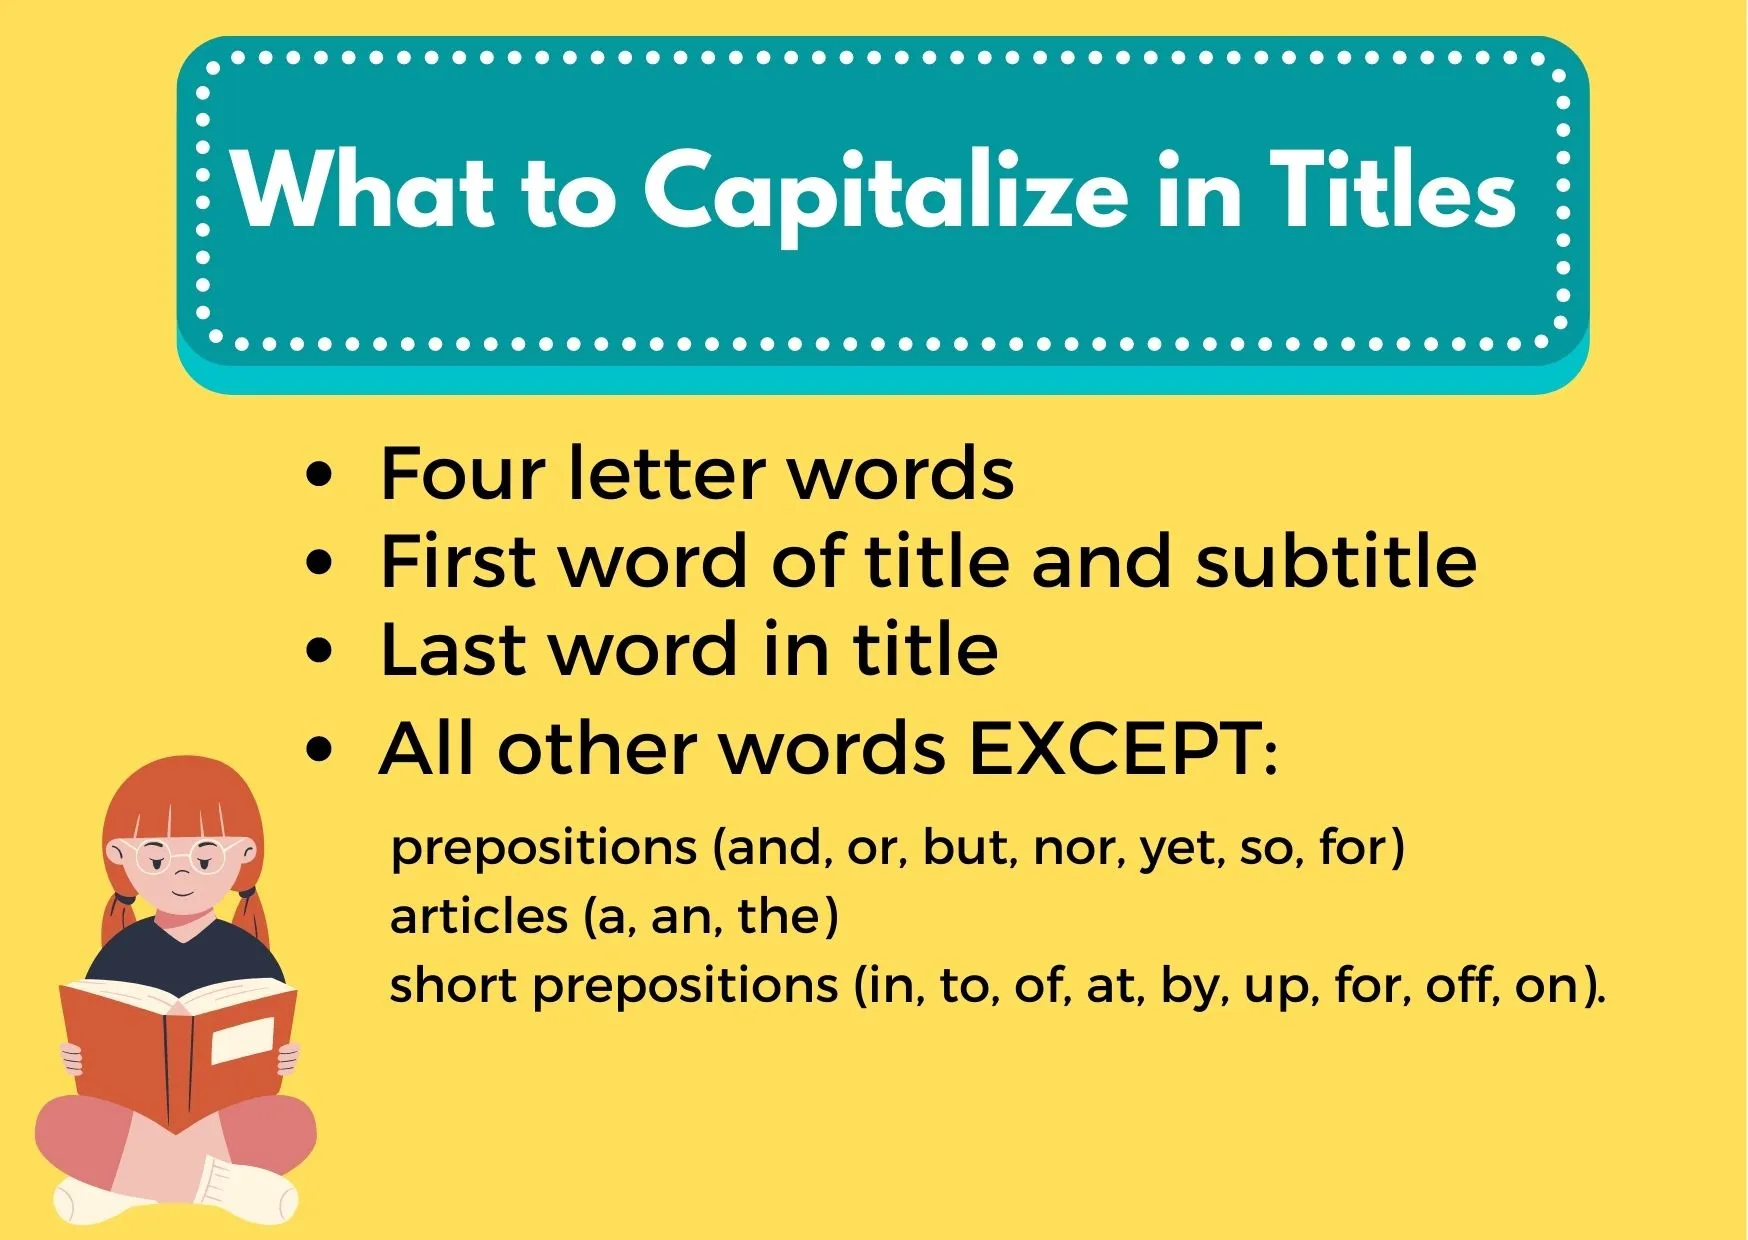 A graphic of a girl reading a book and the text: What to Capitalize in Titles? 1. Four letter words, 2. First word of title and subtitle, 3. Last word in title 4. All other words except preposition, articles and short prepositions